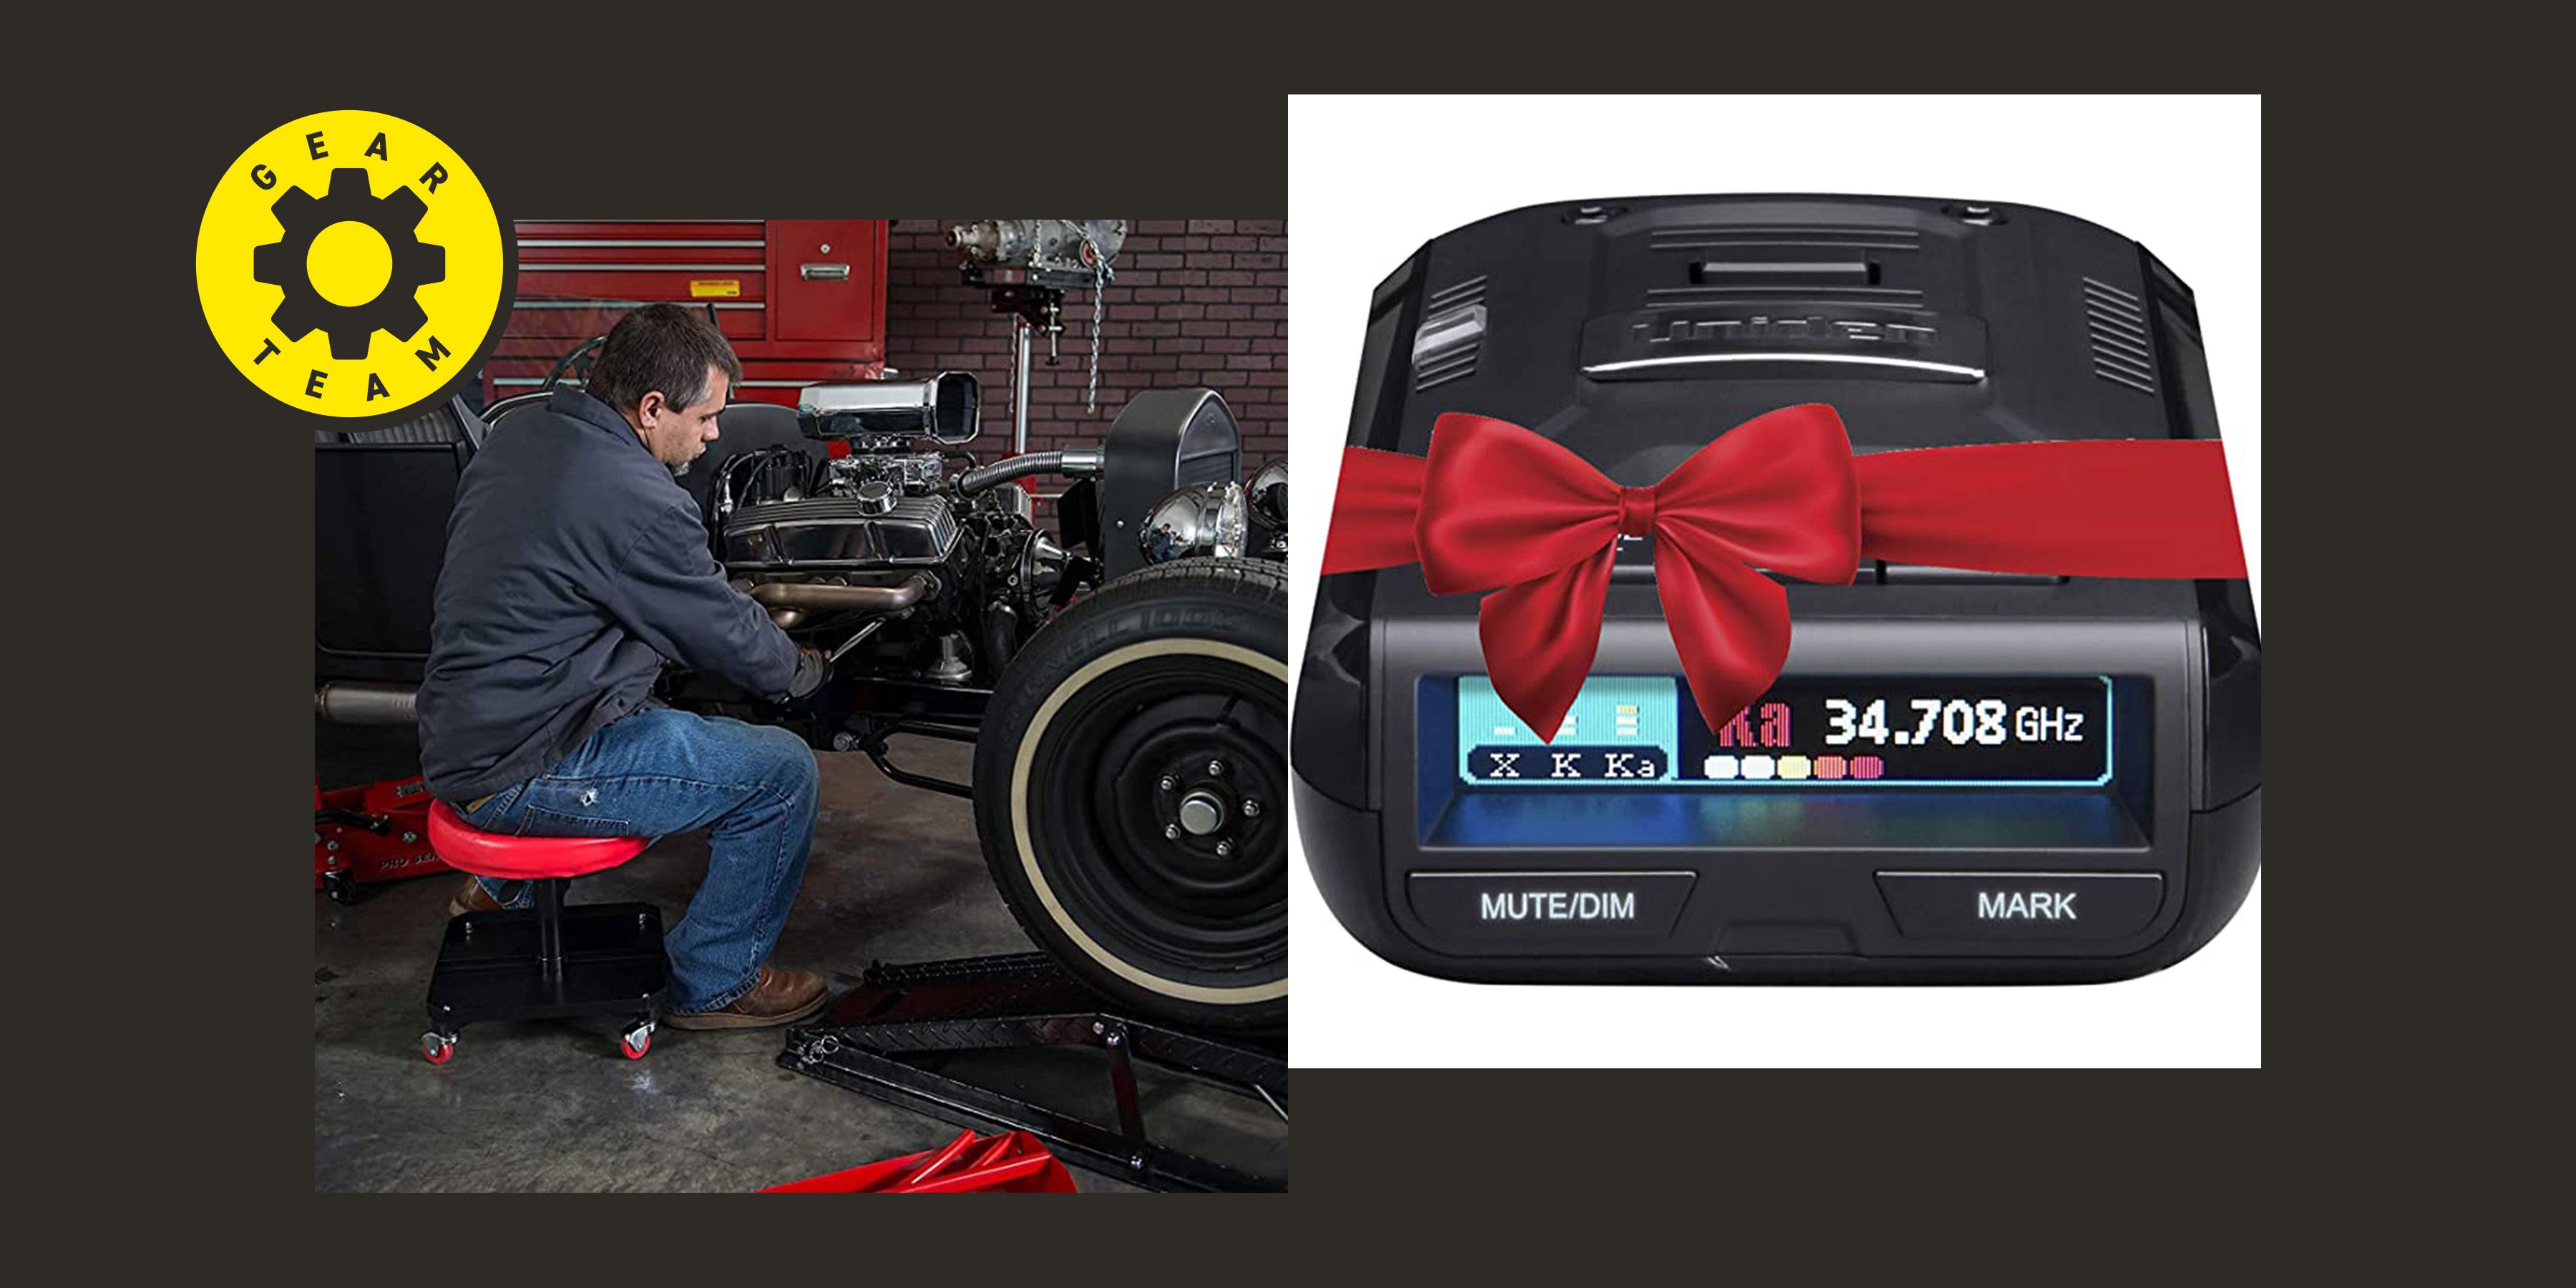 Still Shopping? 11 Perfect Last-Minute Gifts for the Car Enthusiast